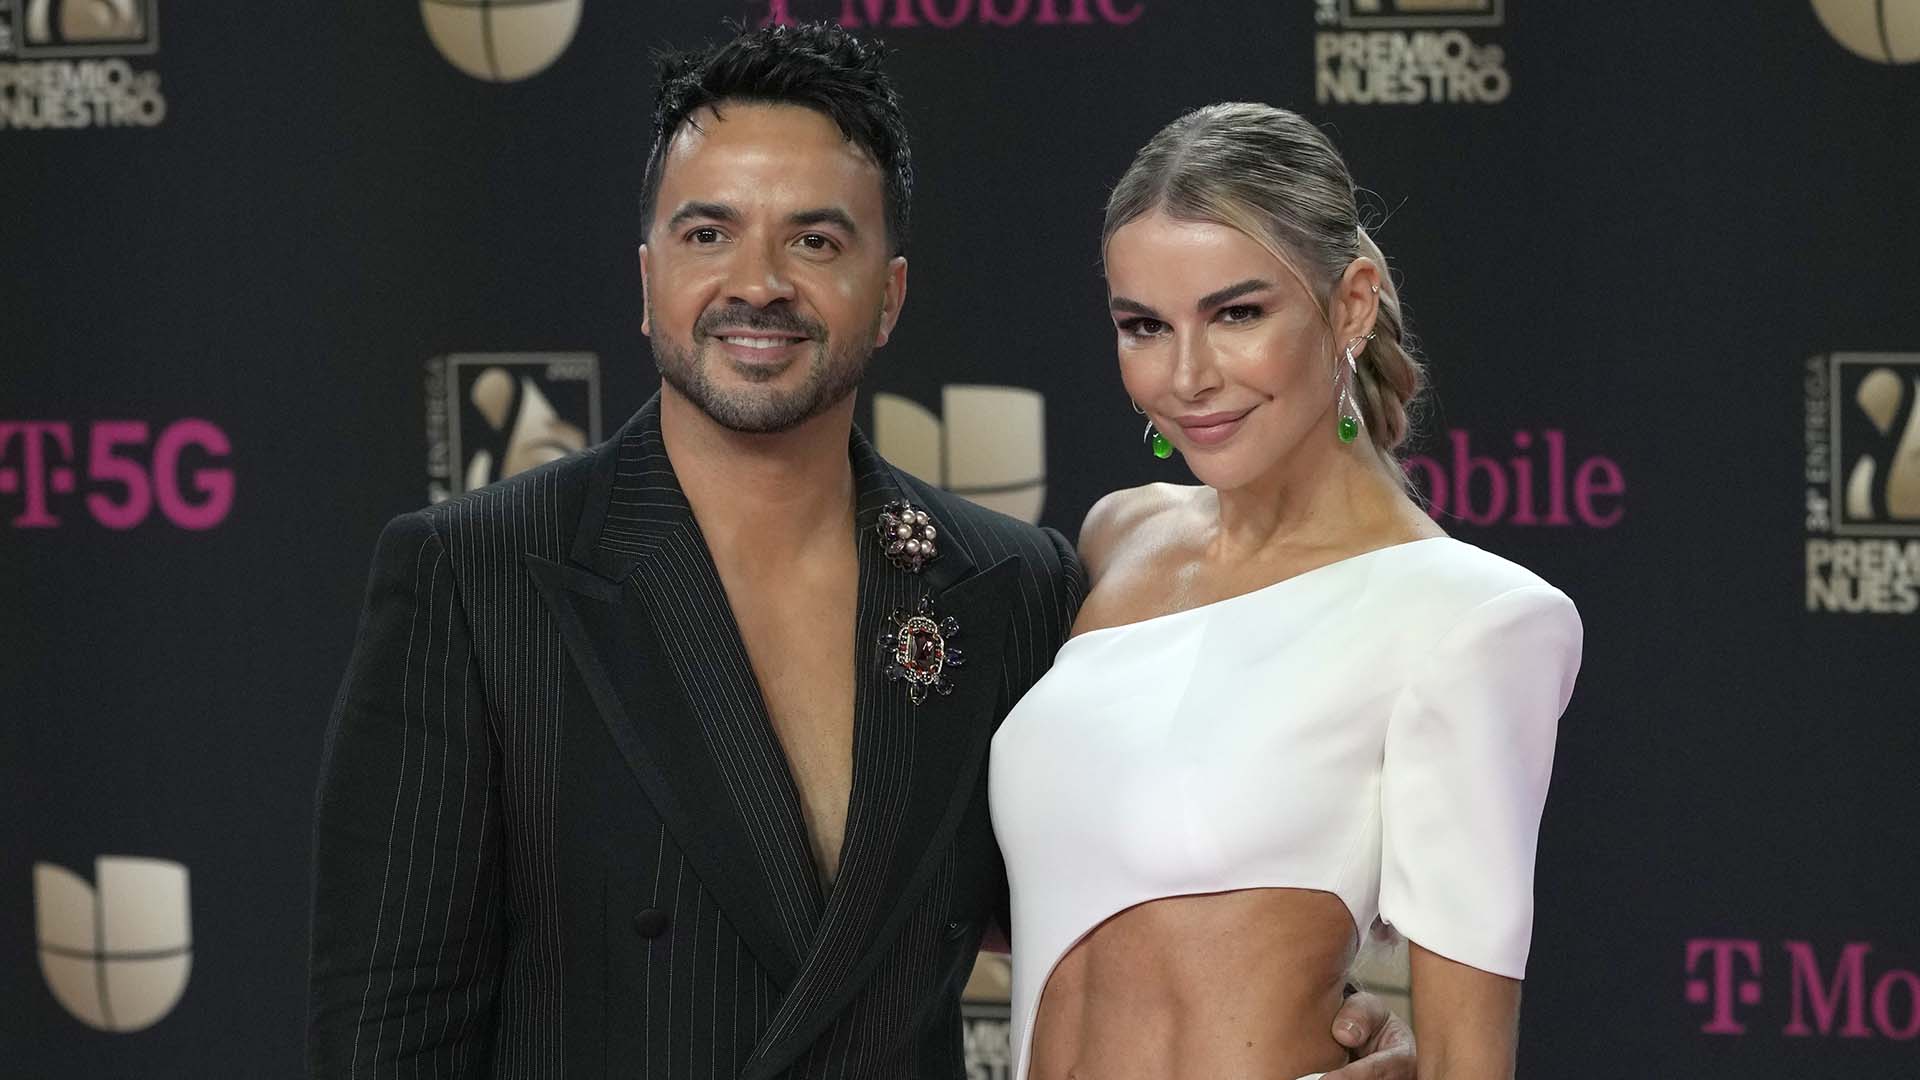 Luis Fonsi, left, and Agueda Lopez arrive at Premio Lo Nuestro at FTX Arena in Miami on Thursday, Feb. 24, 2022.  *** Local Caption *** .